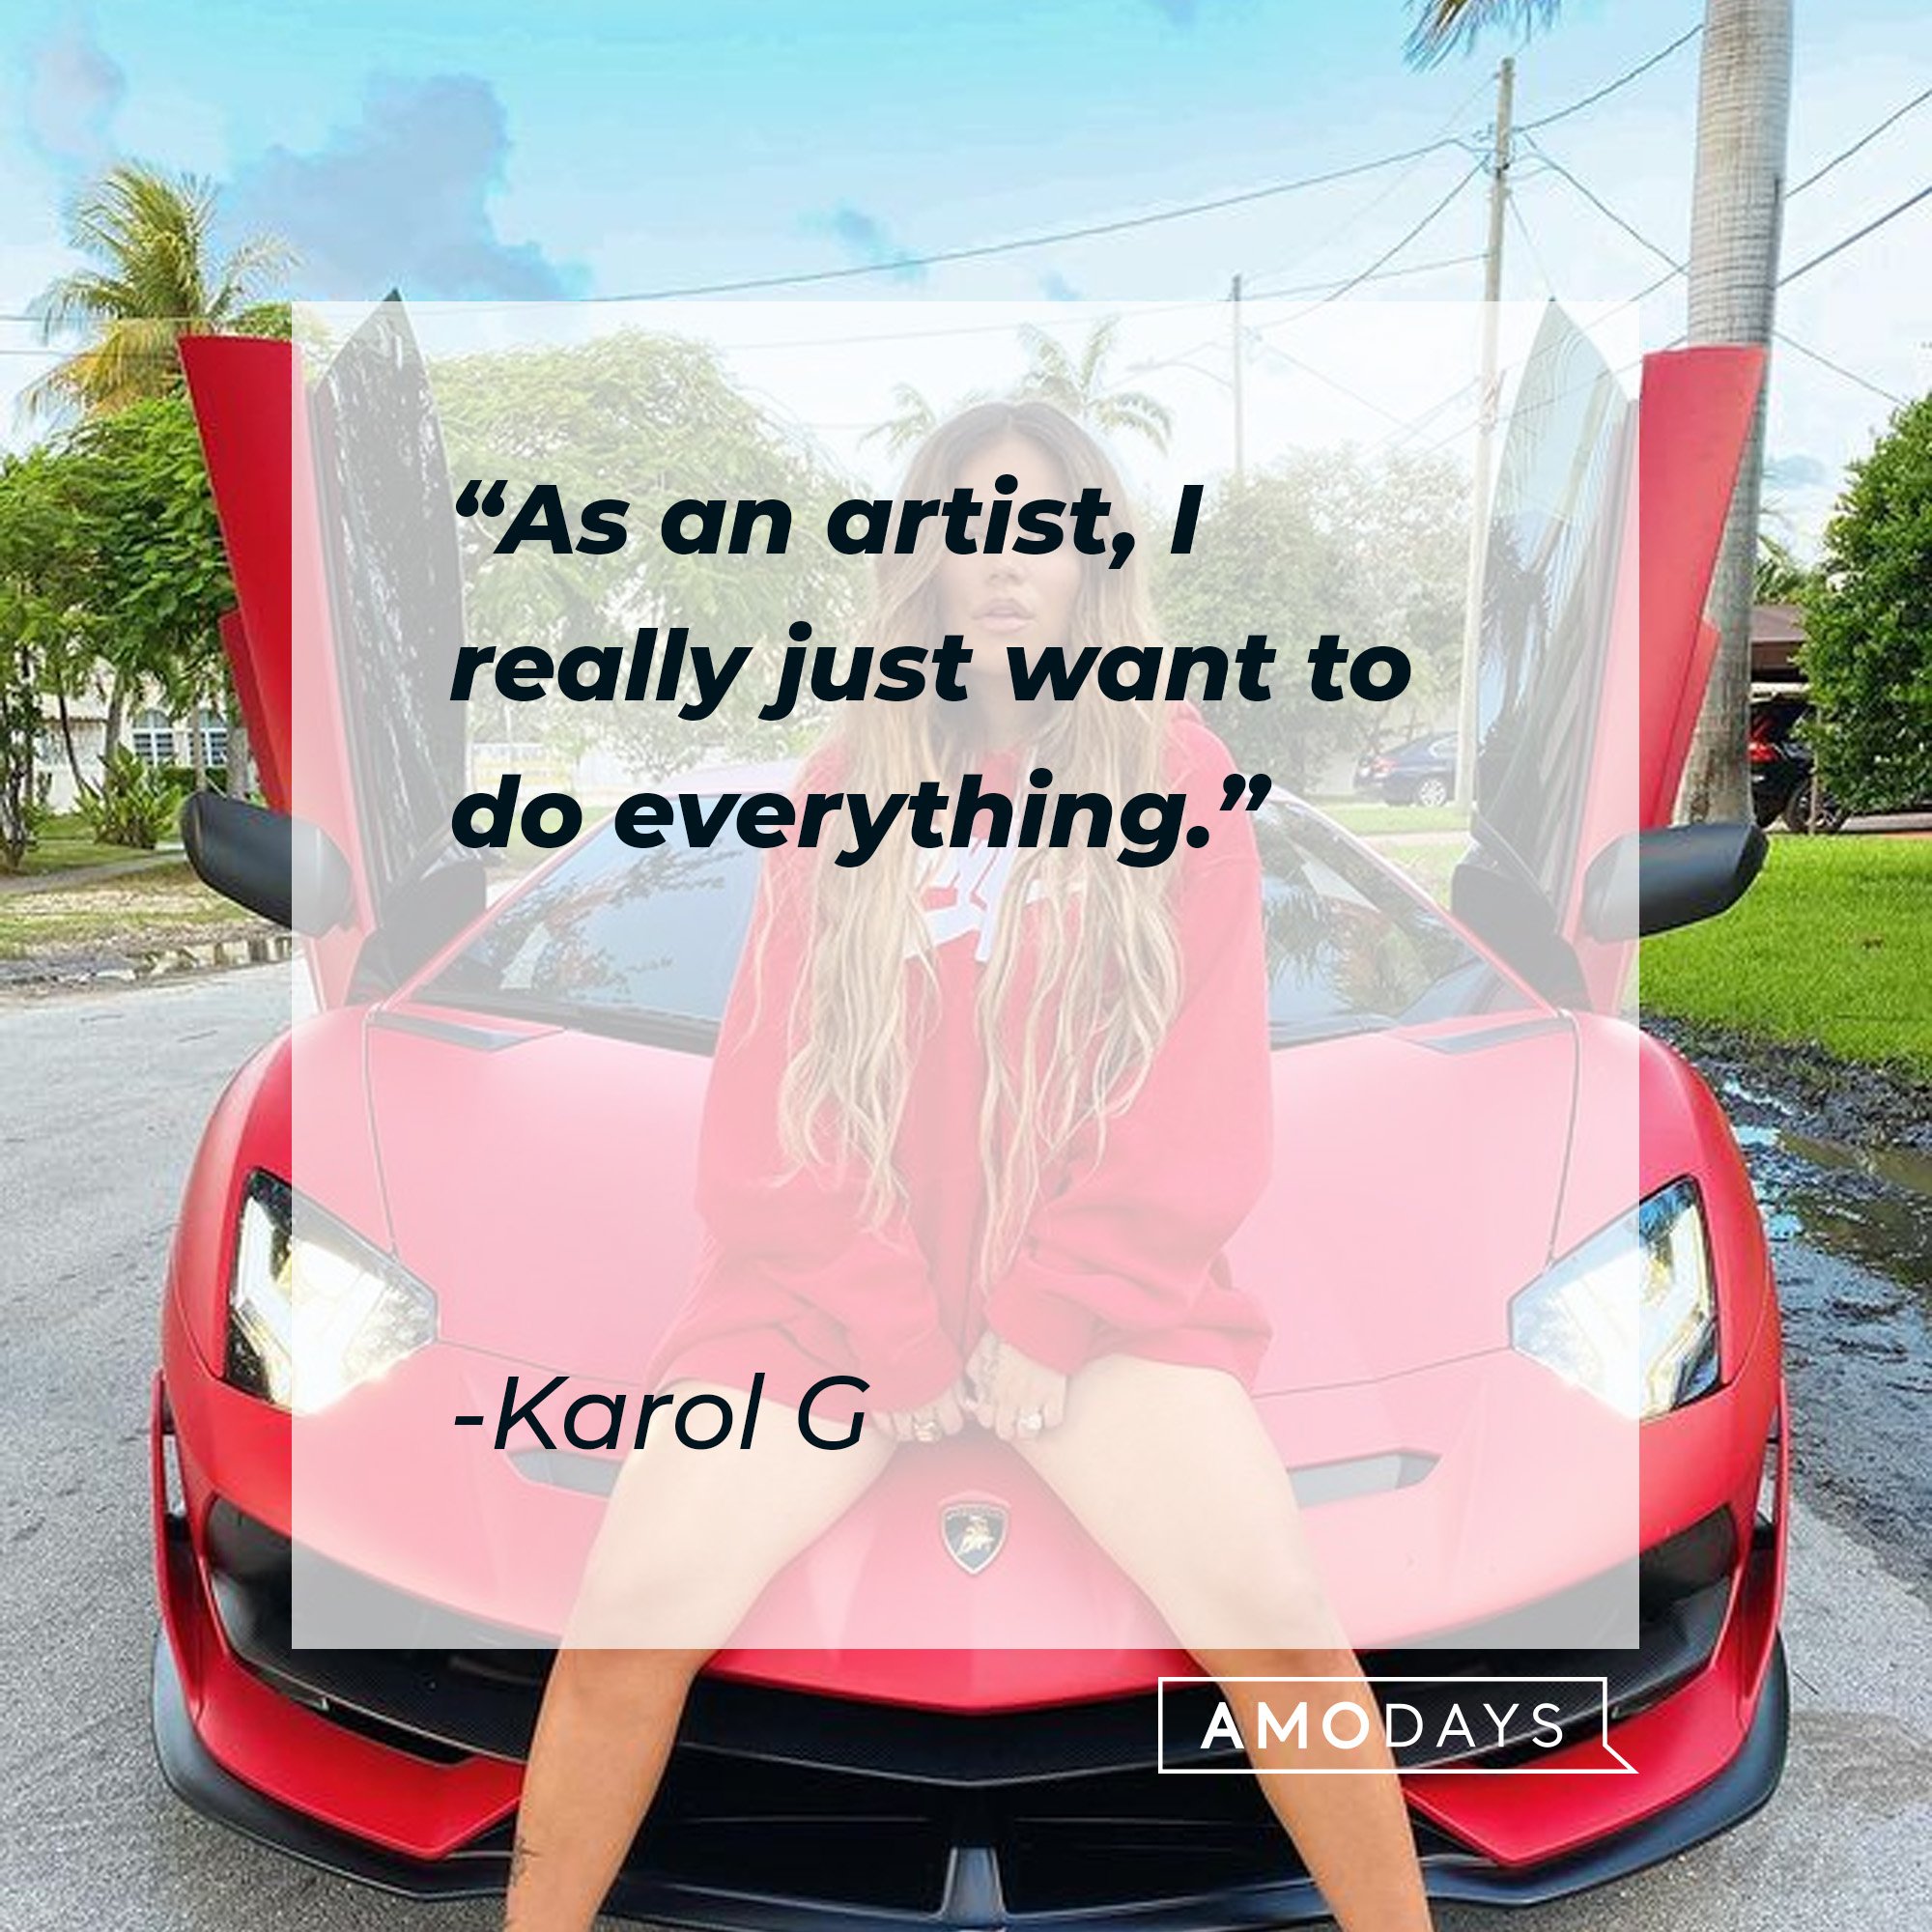 Karol G’s quote: “As an artist, I really just want to do everything.”  | Image: AmoDays